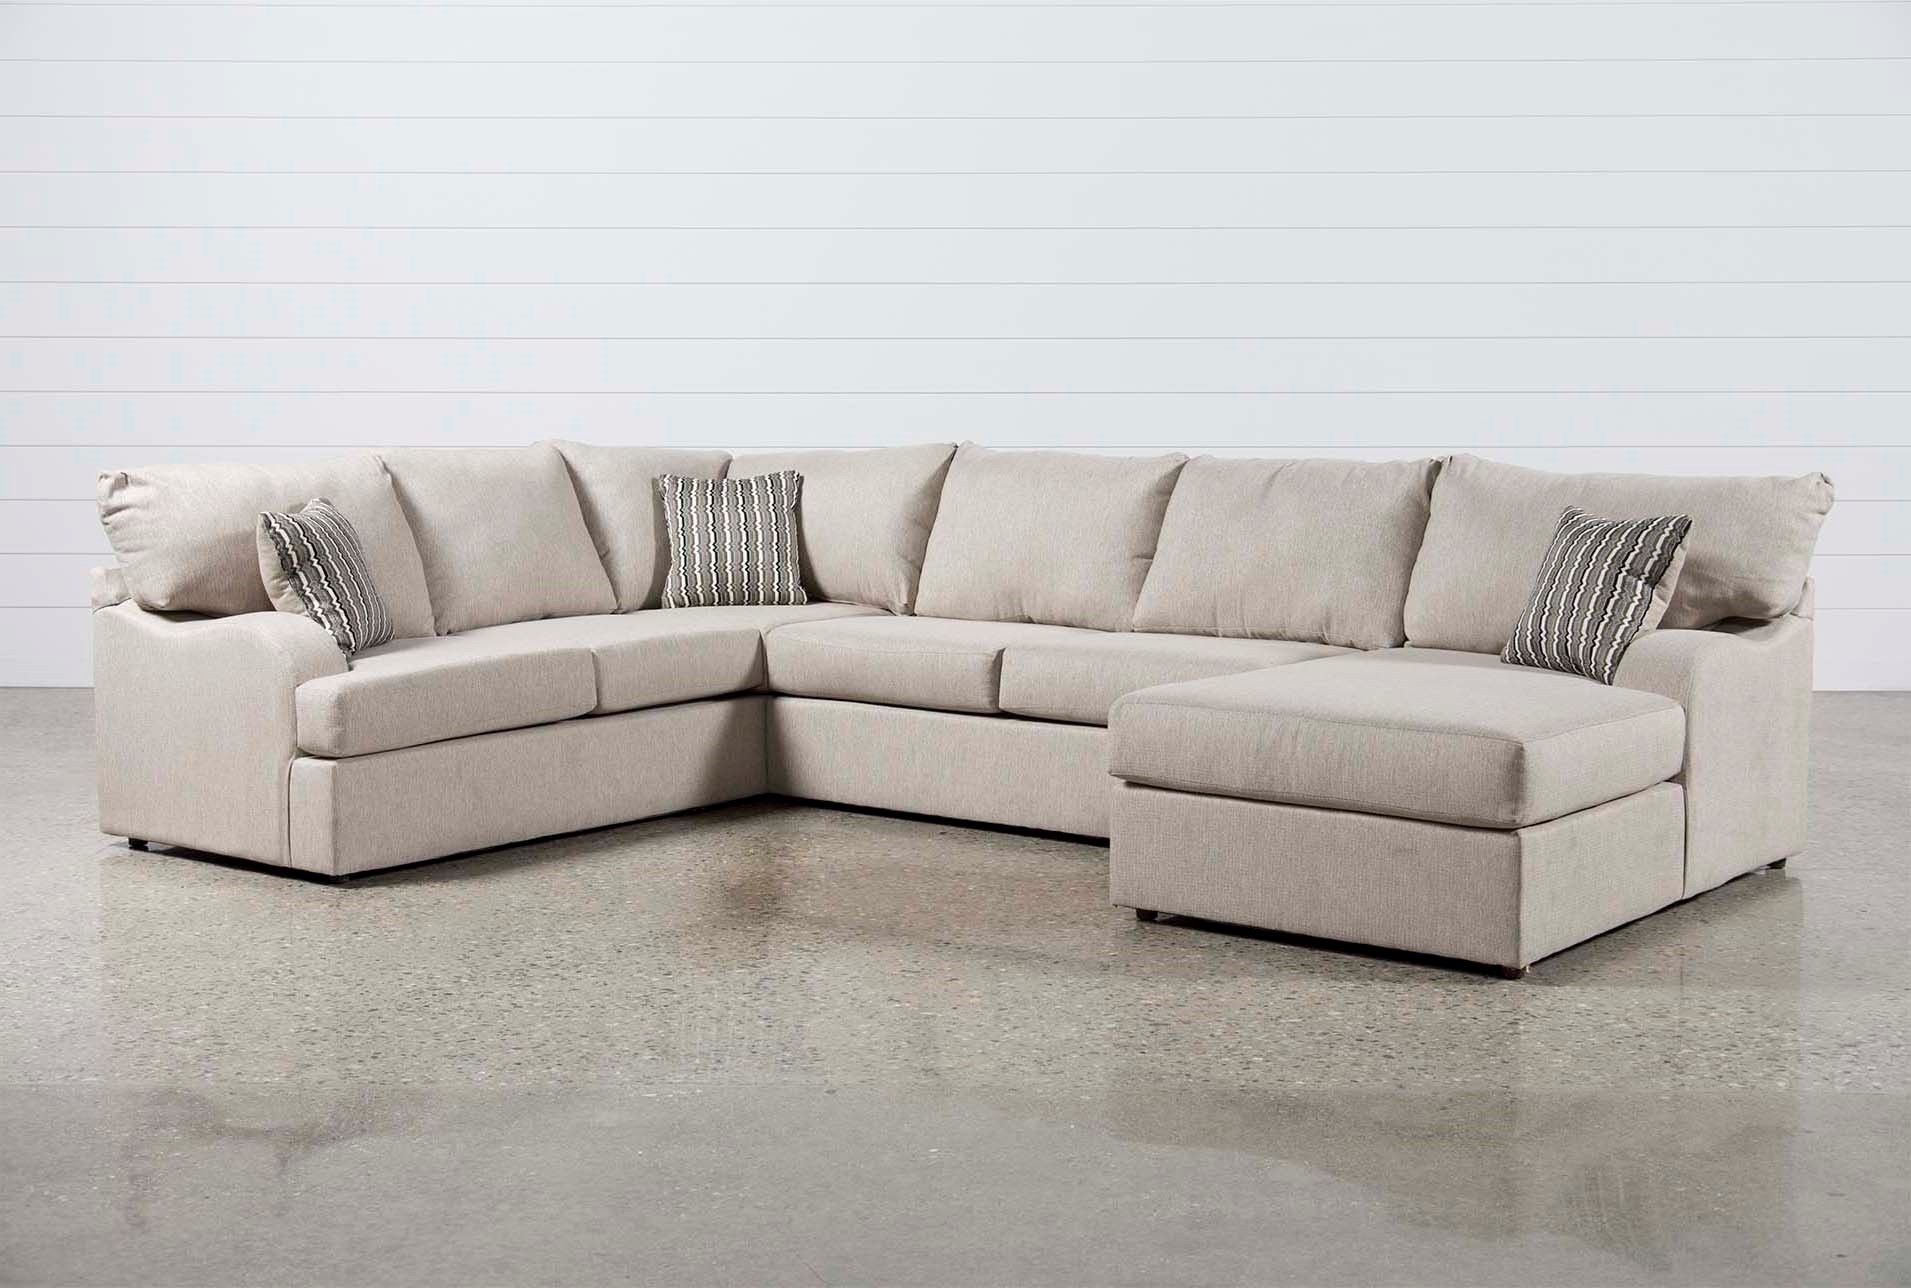 3 Piece Sectional With Chaise Sierra Down W Laf Living Spaces 212468 In Sierra Down 3 Piece Sectionals With Laf Chaise (View 2 of 25)